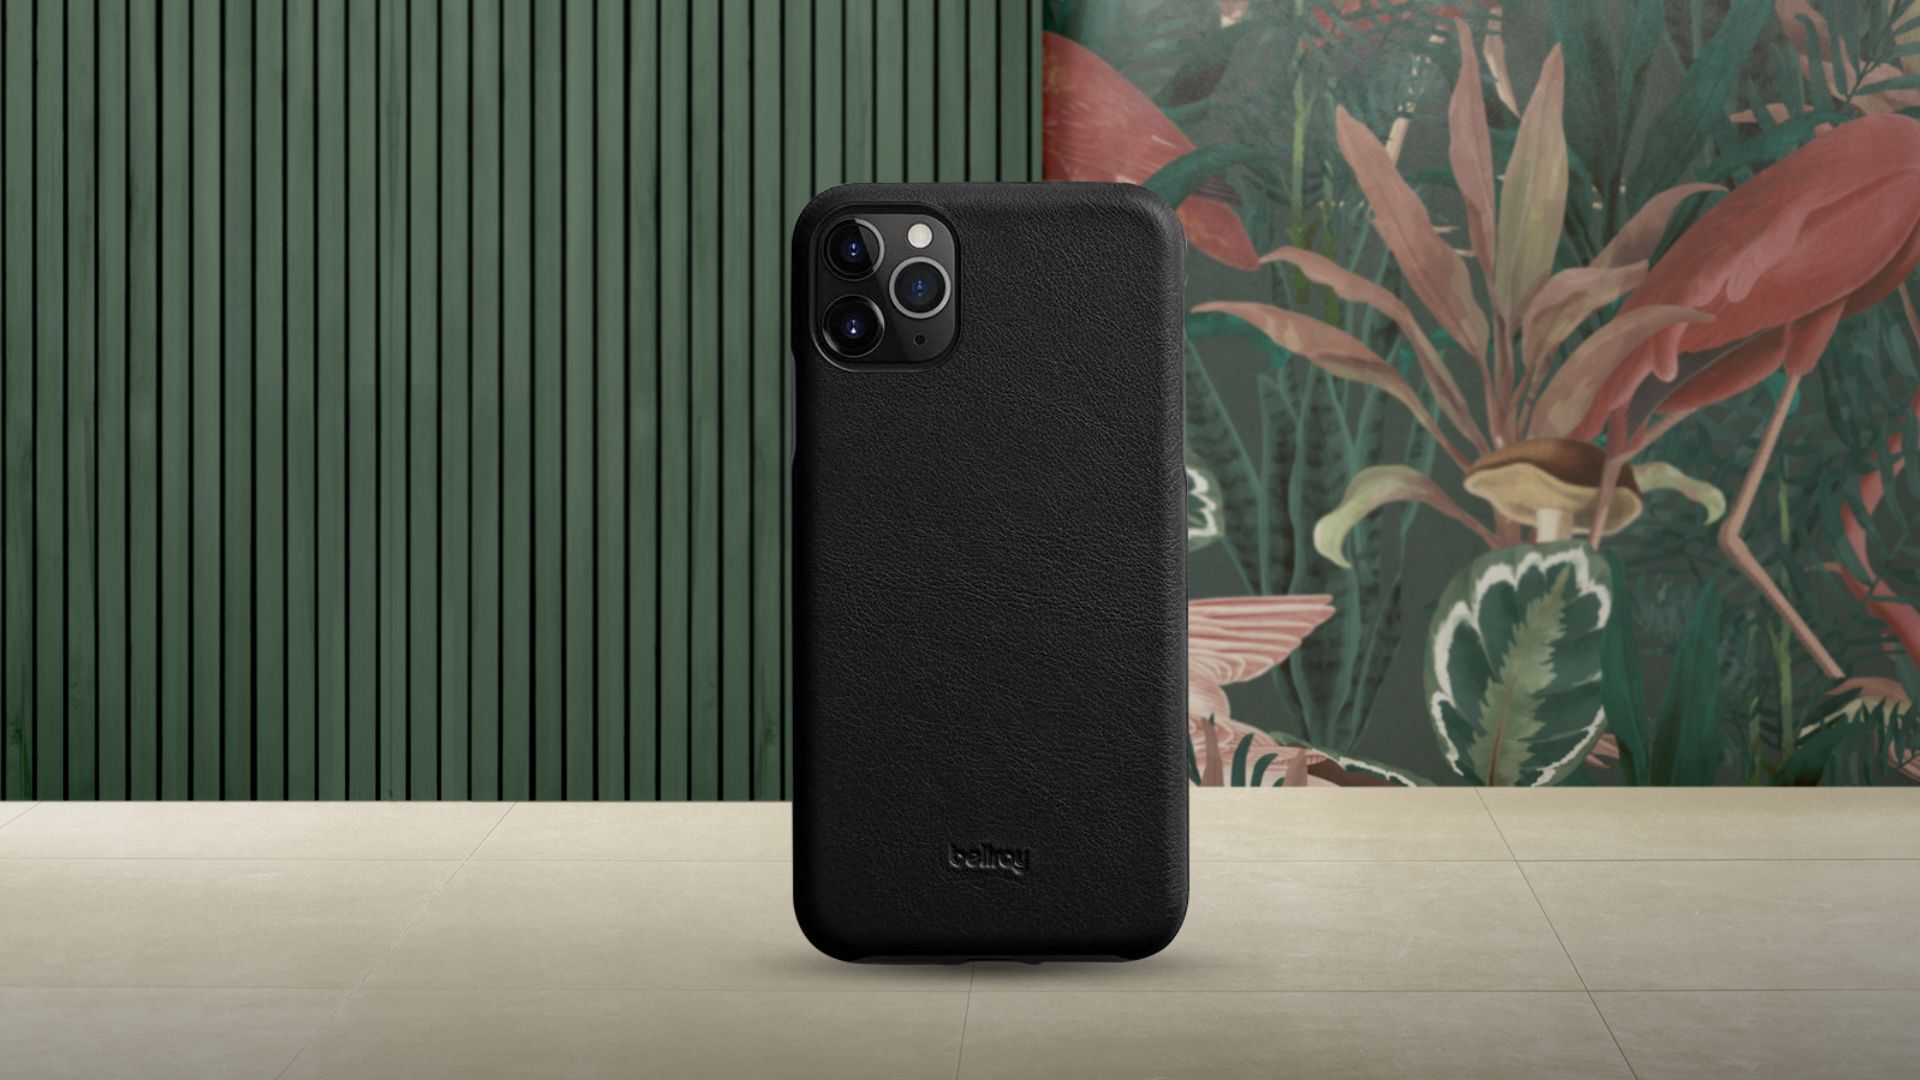 Bellroy iPhone leather case